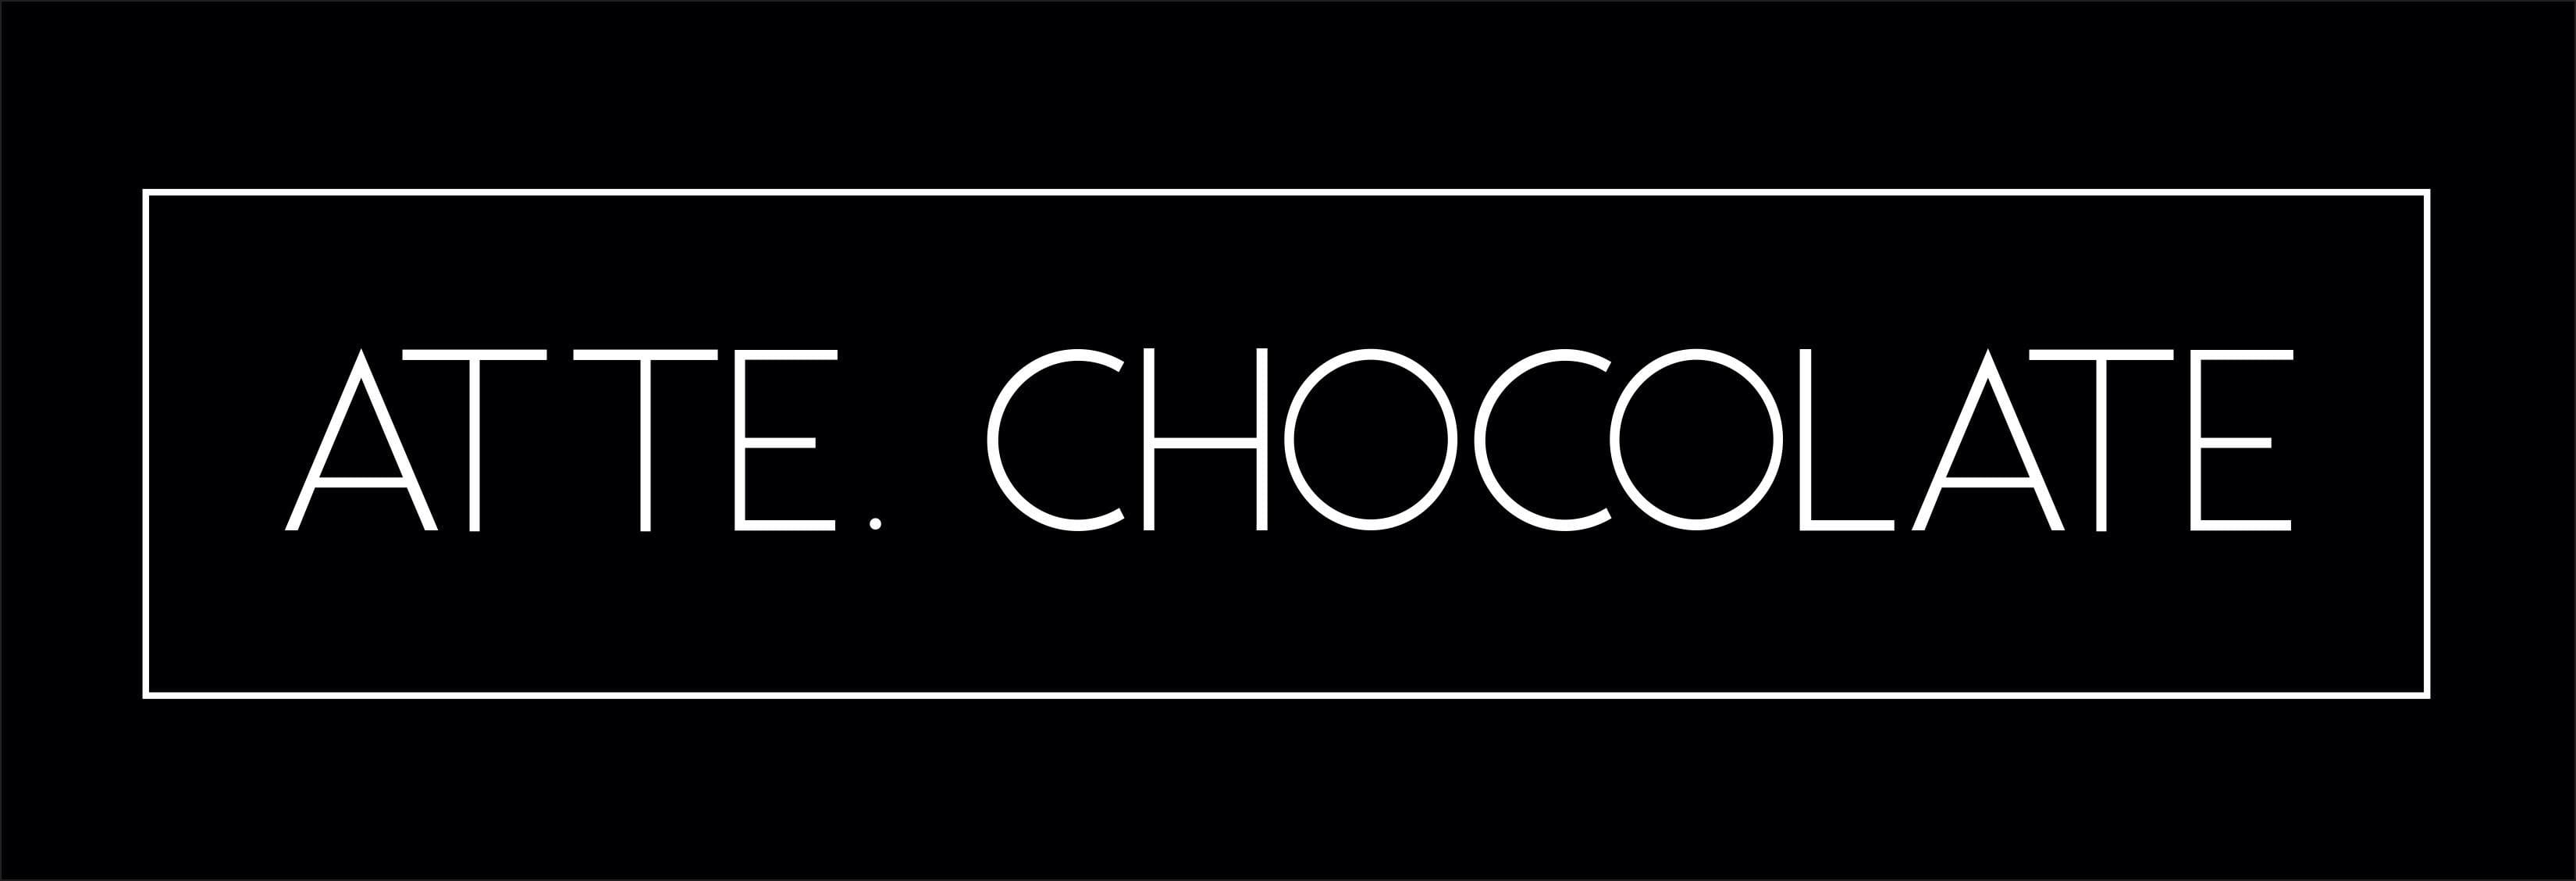 Atte. Chocolate